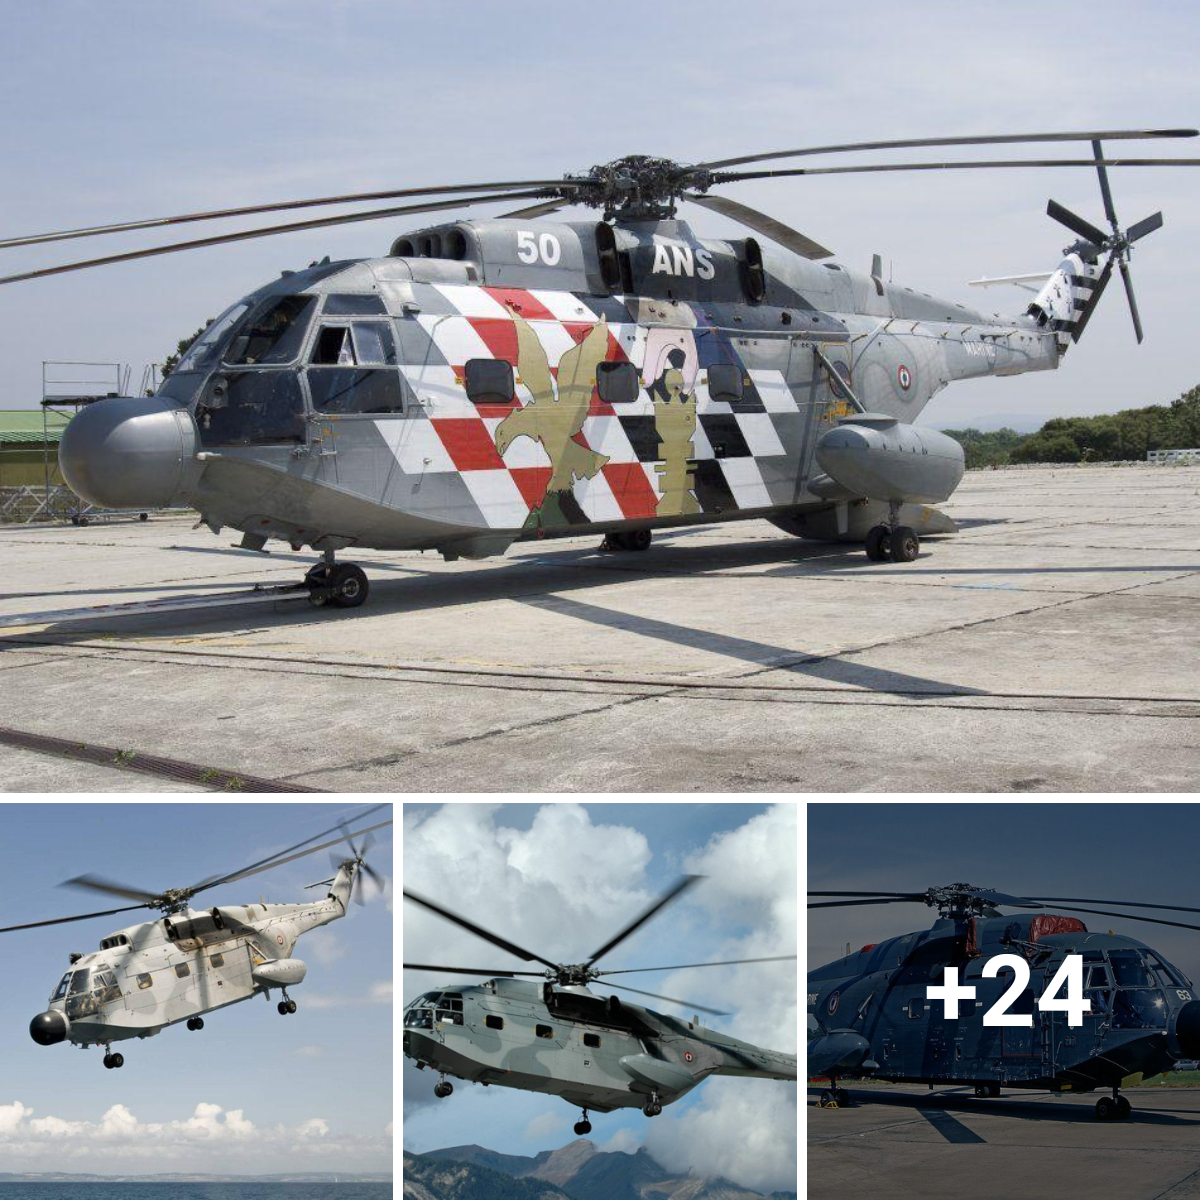 Introducing the SA 321 Super Frelon, Europe’s Revolutionary Helicopter Superpower